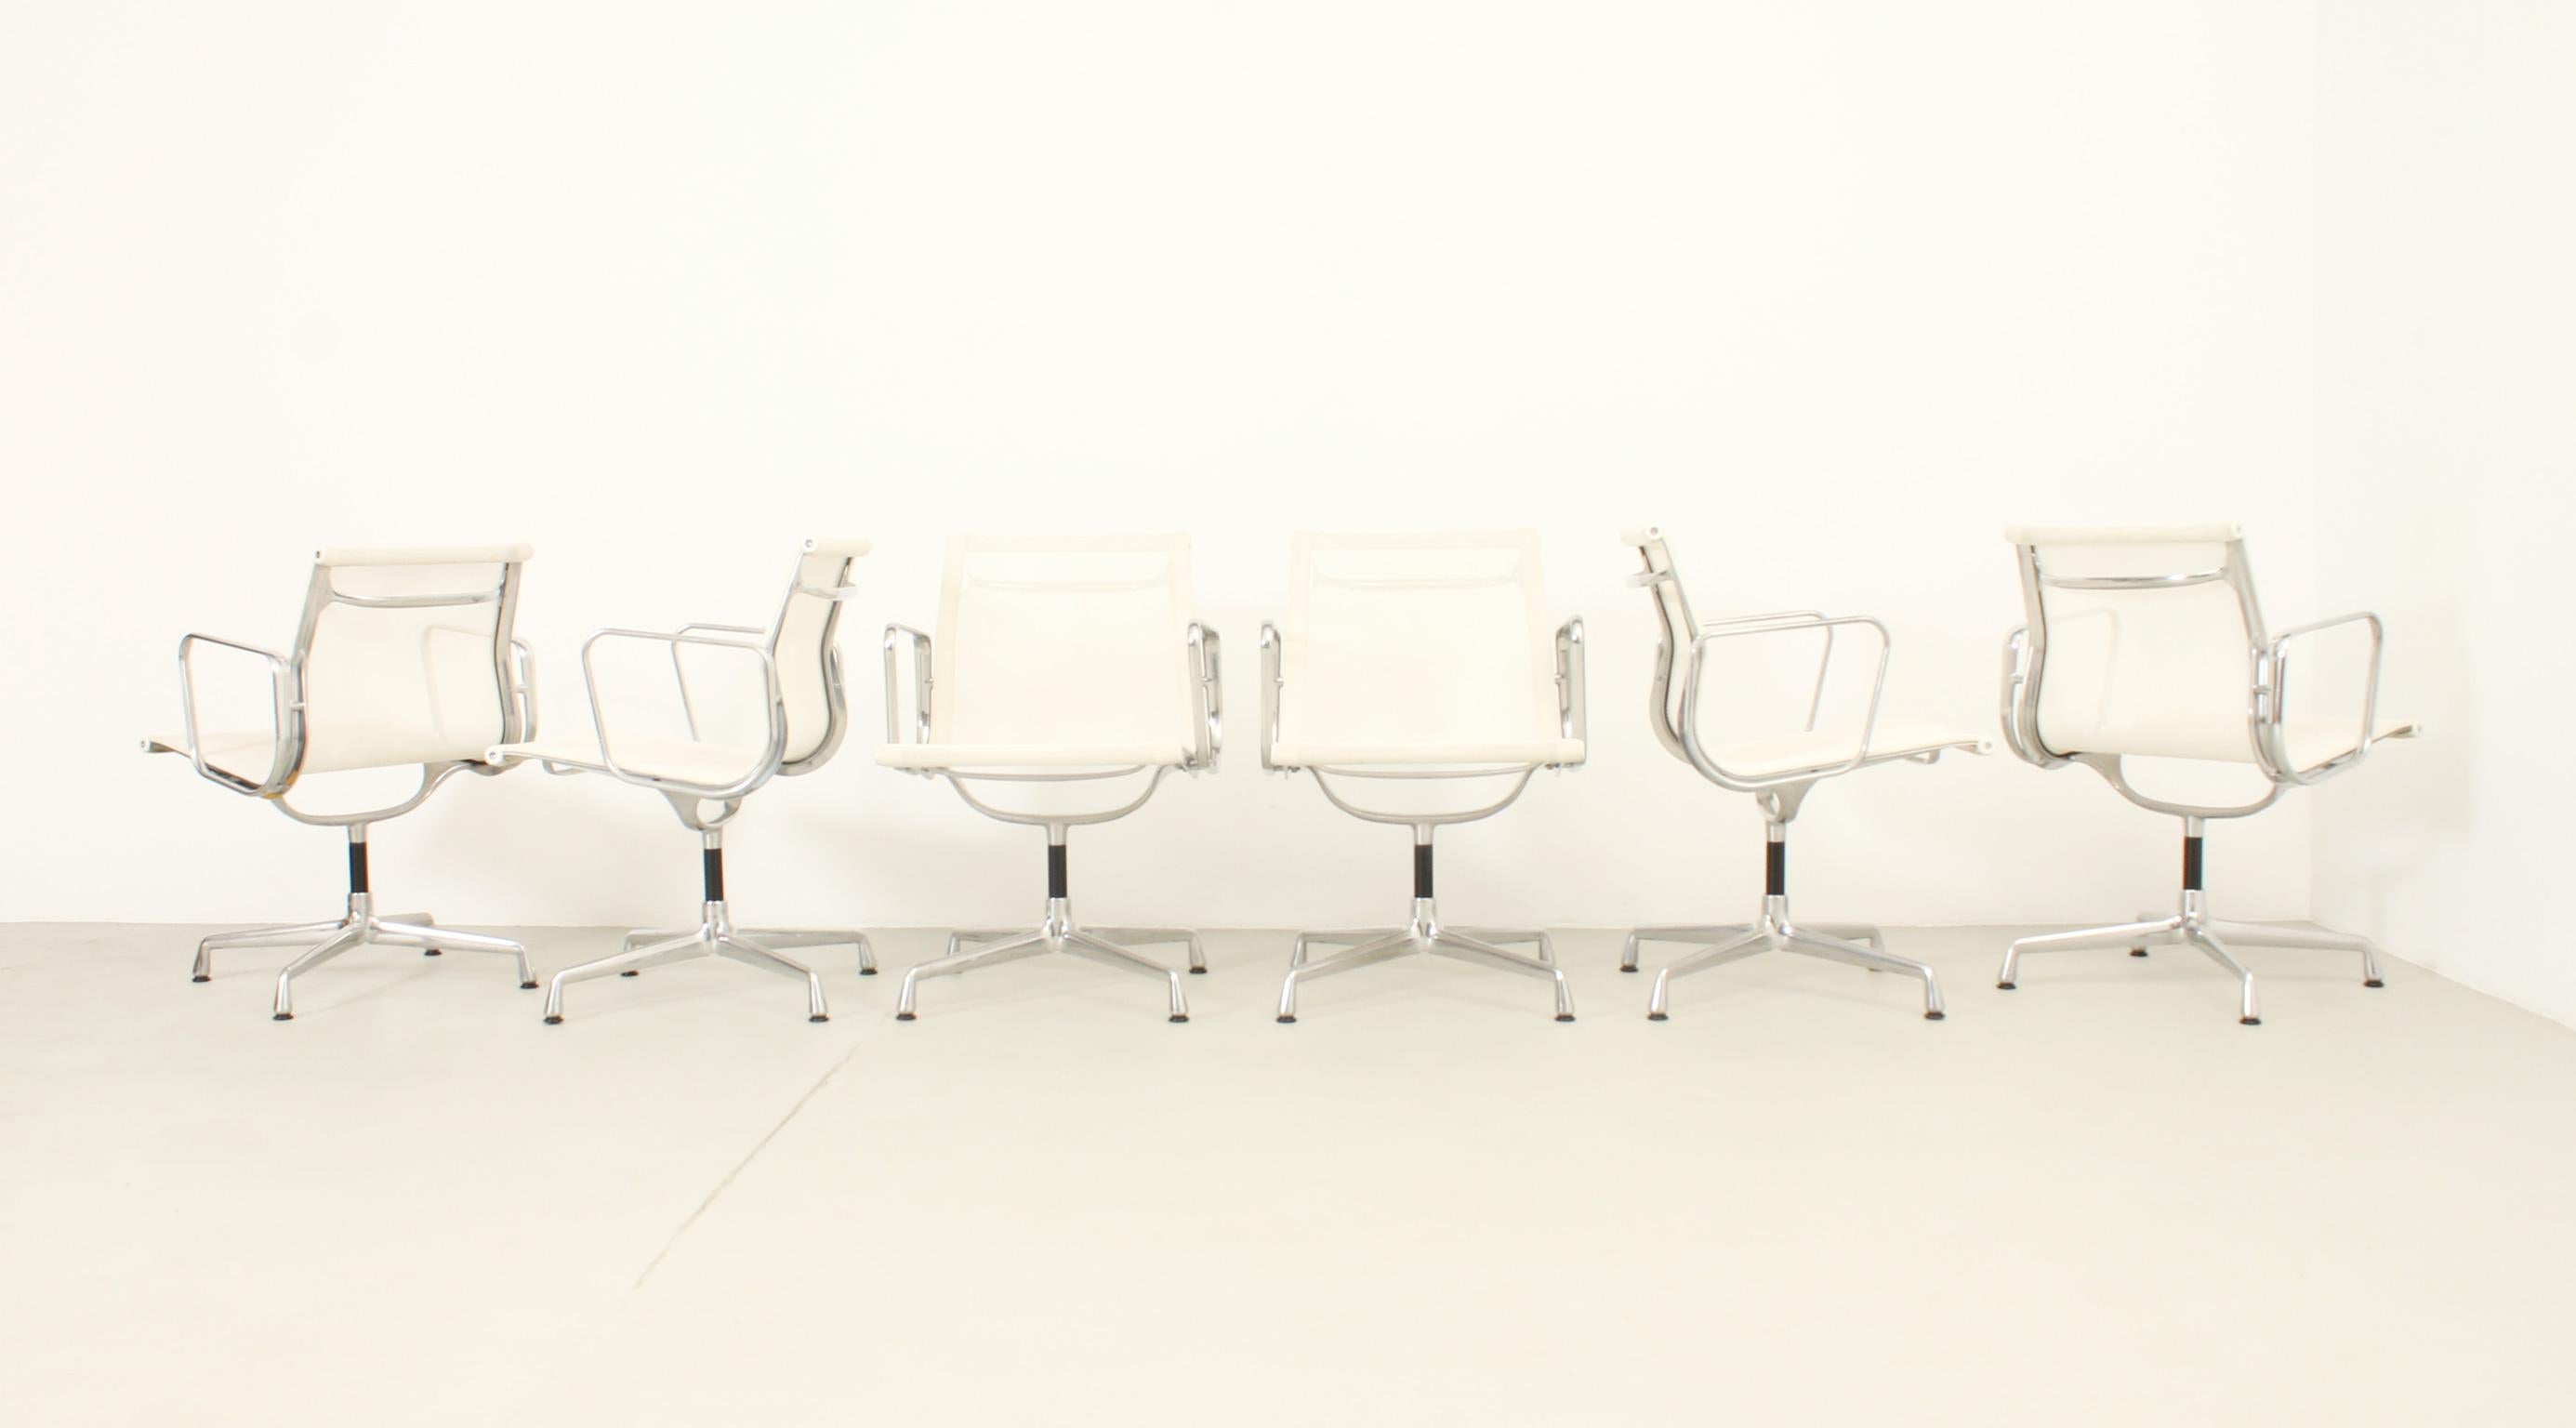 Set of six  Aluminum EA108 chairs designed by Charles and Ray Eames in 1958. Chromed-plated aluminum base and white net-weave seat with swivel mechanism. Vitra edition, signed, with 18 years old.